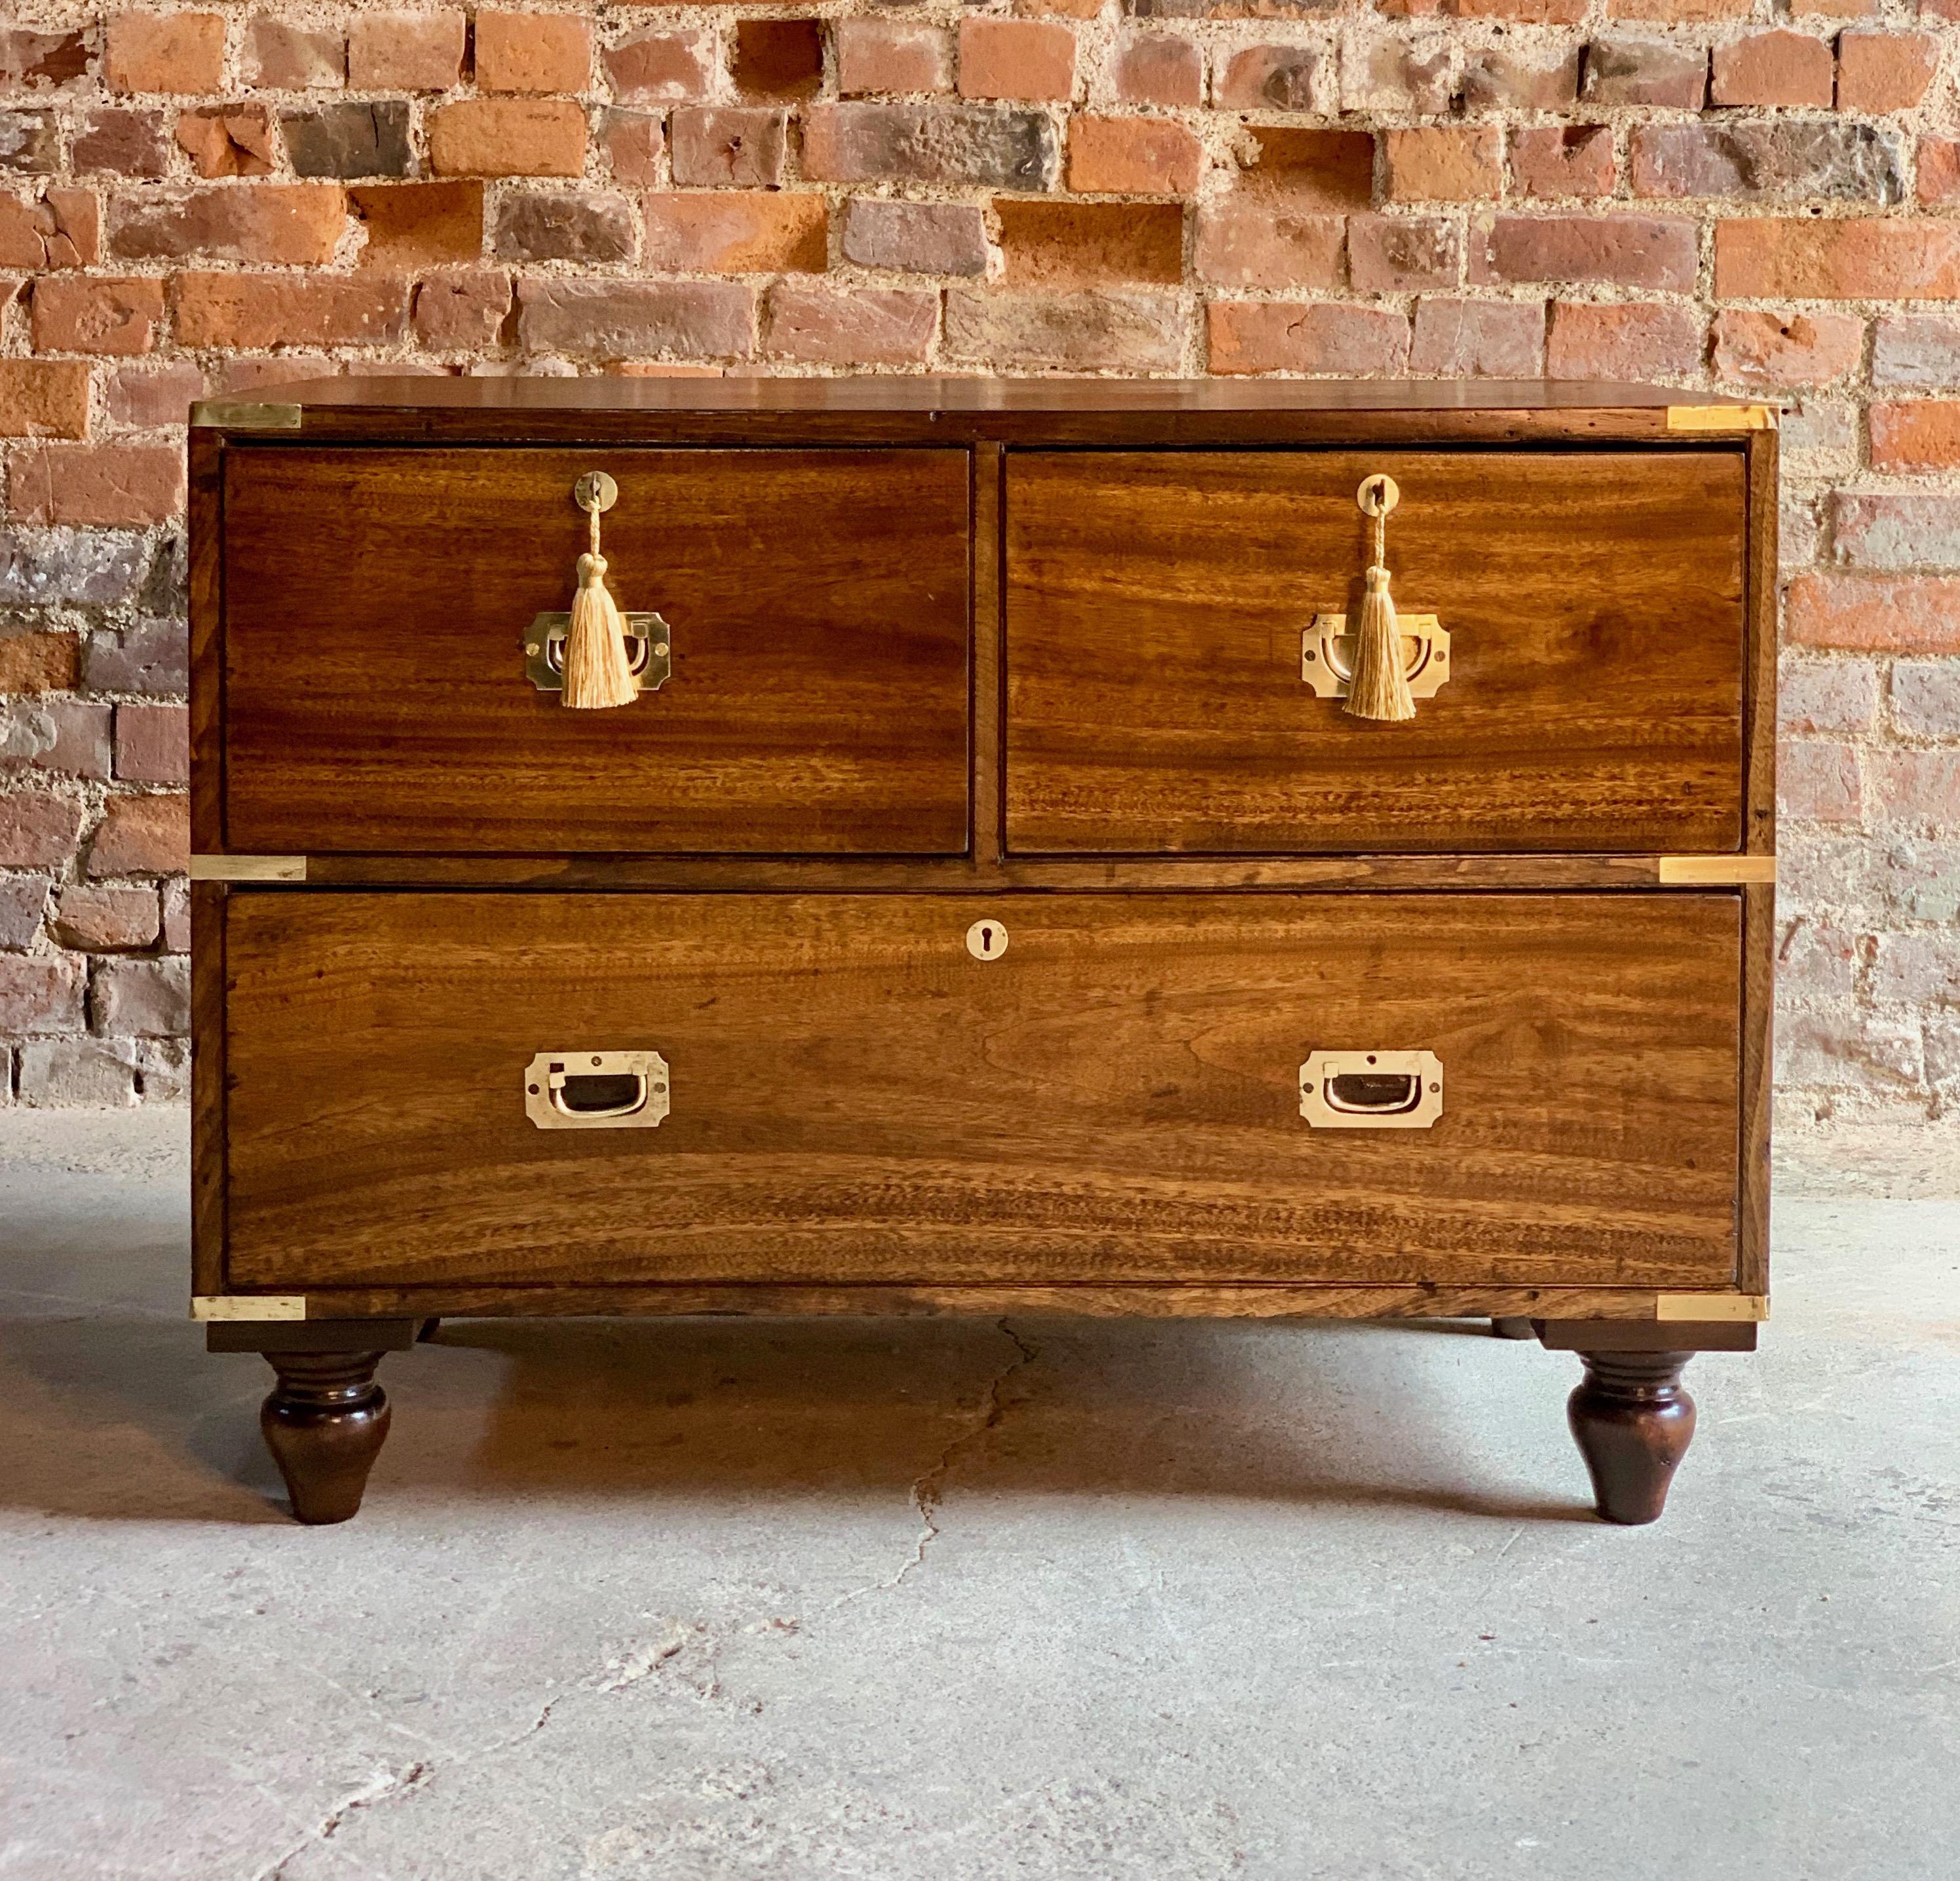 Mid-19th Century Victorian Camphor Campaign Chest of Drawers Dresser 'circa 1850' Number 26